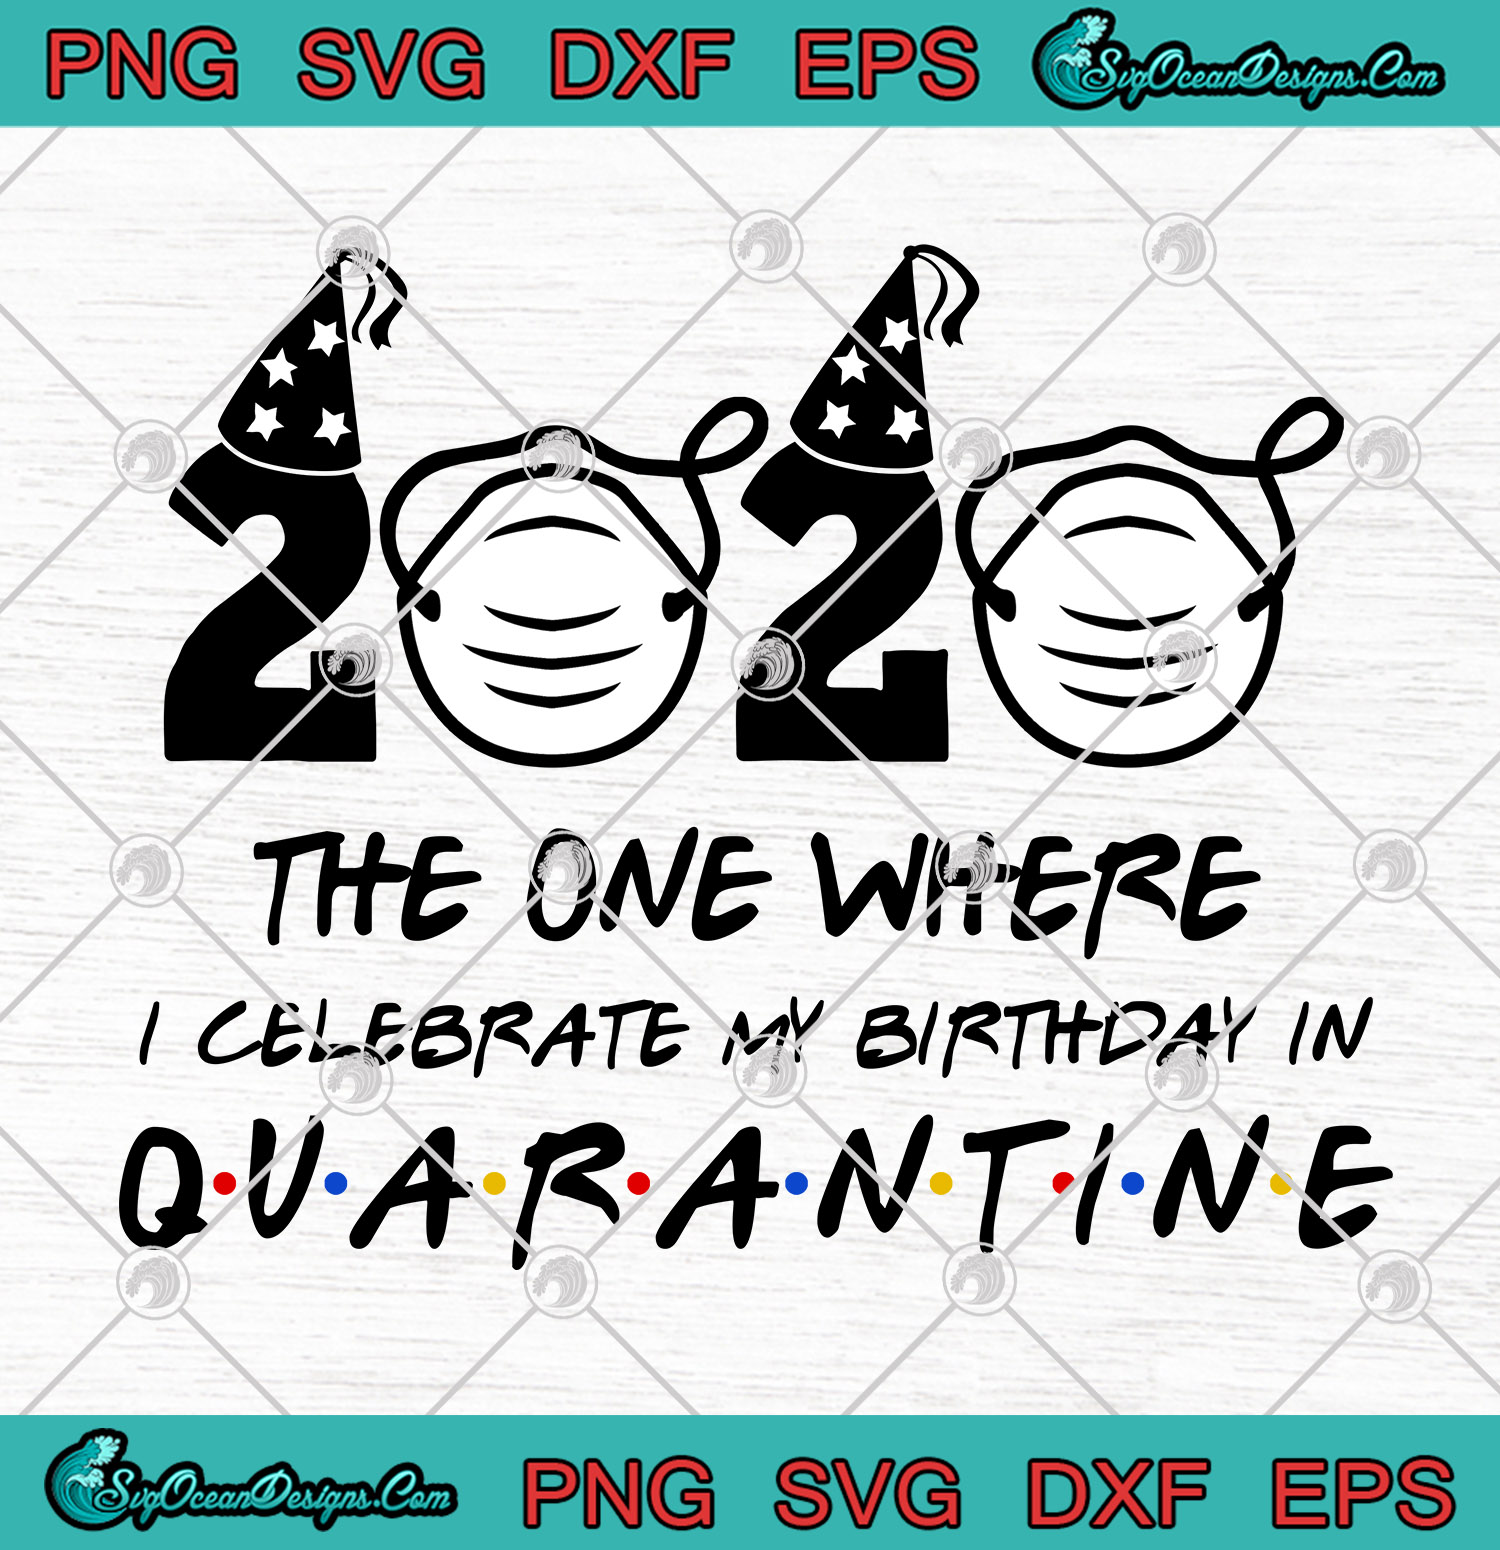 2020 The One Where I Celebrate My Birthday In Quarantine Svg Png Eps Dxf Cutting File Cricut Silhouette Art Designs Digital Download